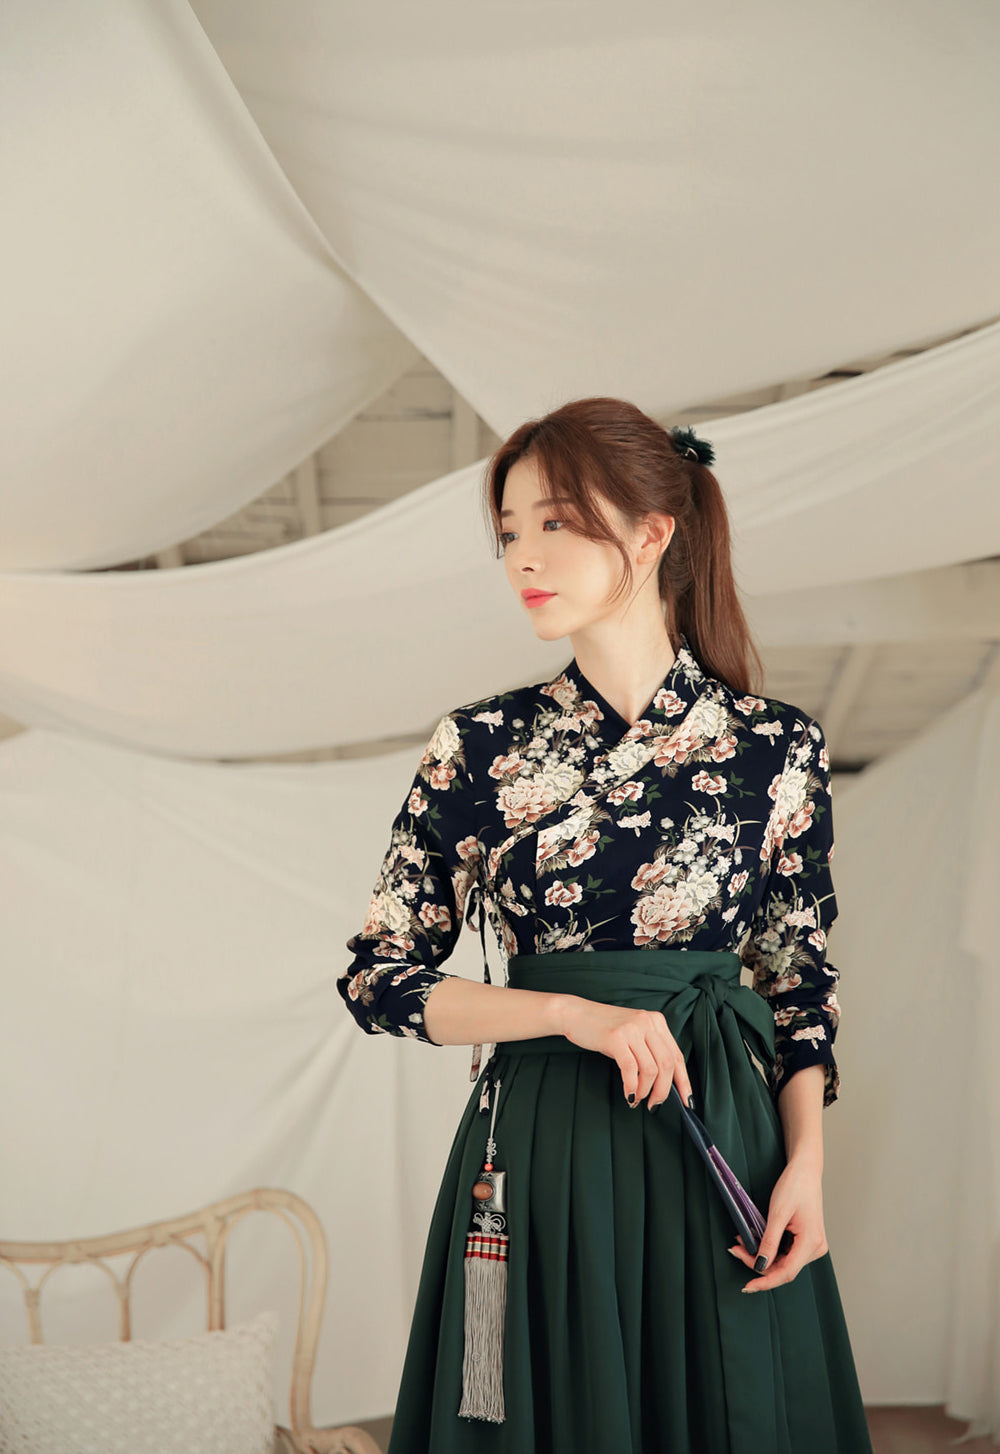 Bring a touch of Korea with you by wearing this cyan flower modern hanbok dress.